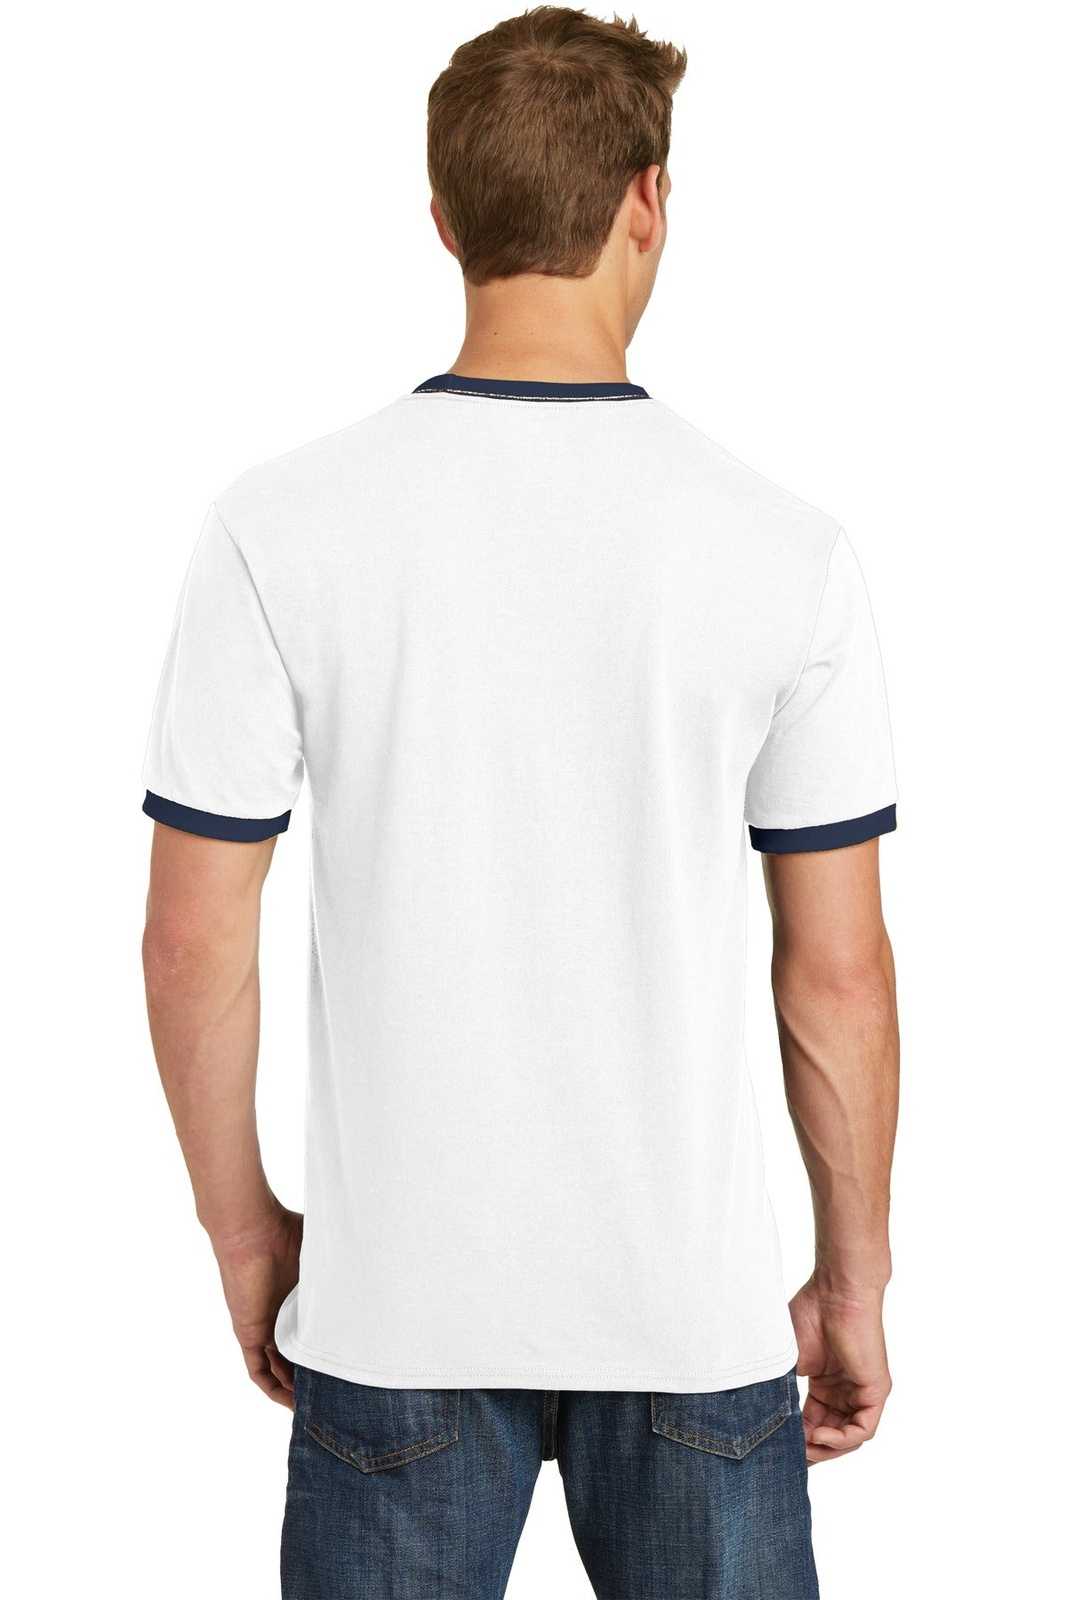 Port &amp; Company PC54R Core Cotton Ringer Tee - White Navy - HIT a Double - 2